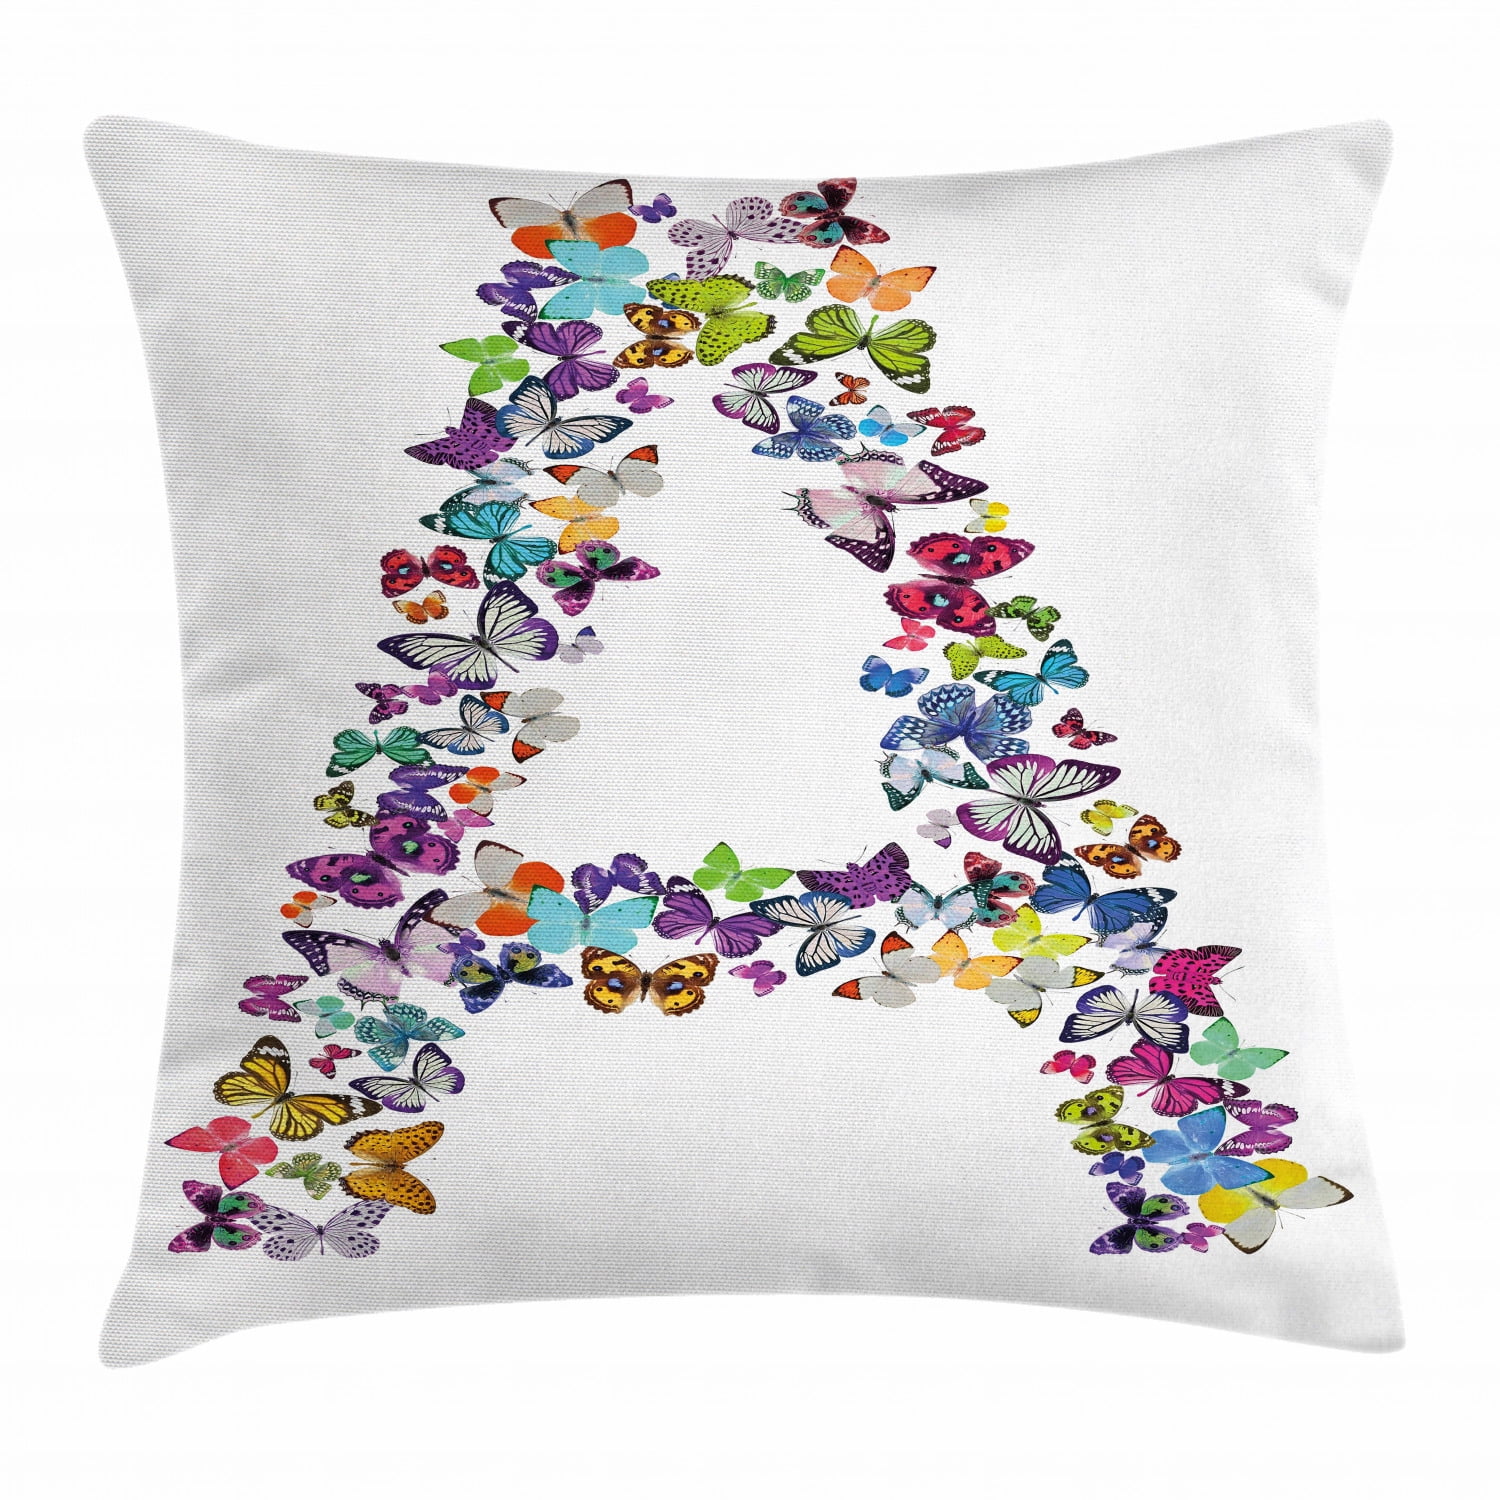 Lepidoptera Insect Flower Monarch Biology Gift Life is Short Beautiful Butterflies Nature Spring Throw Pillow 18x18 Multicolor